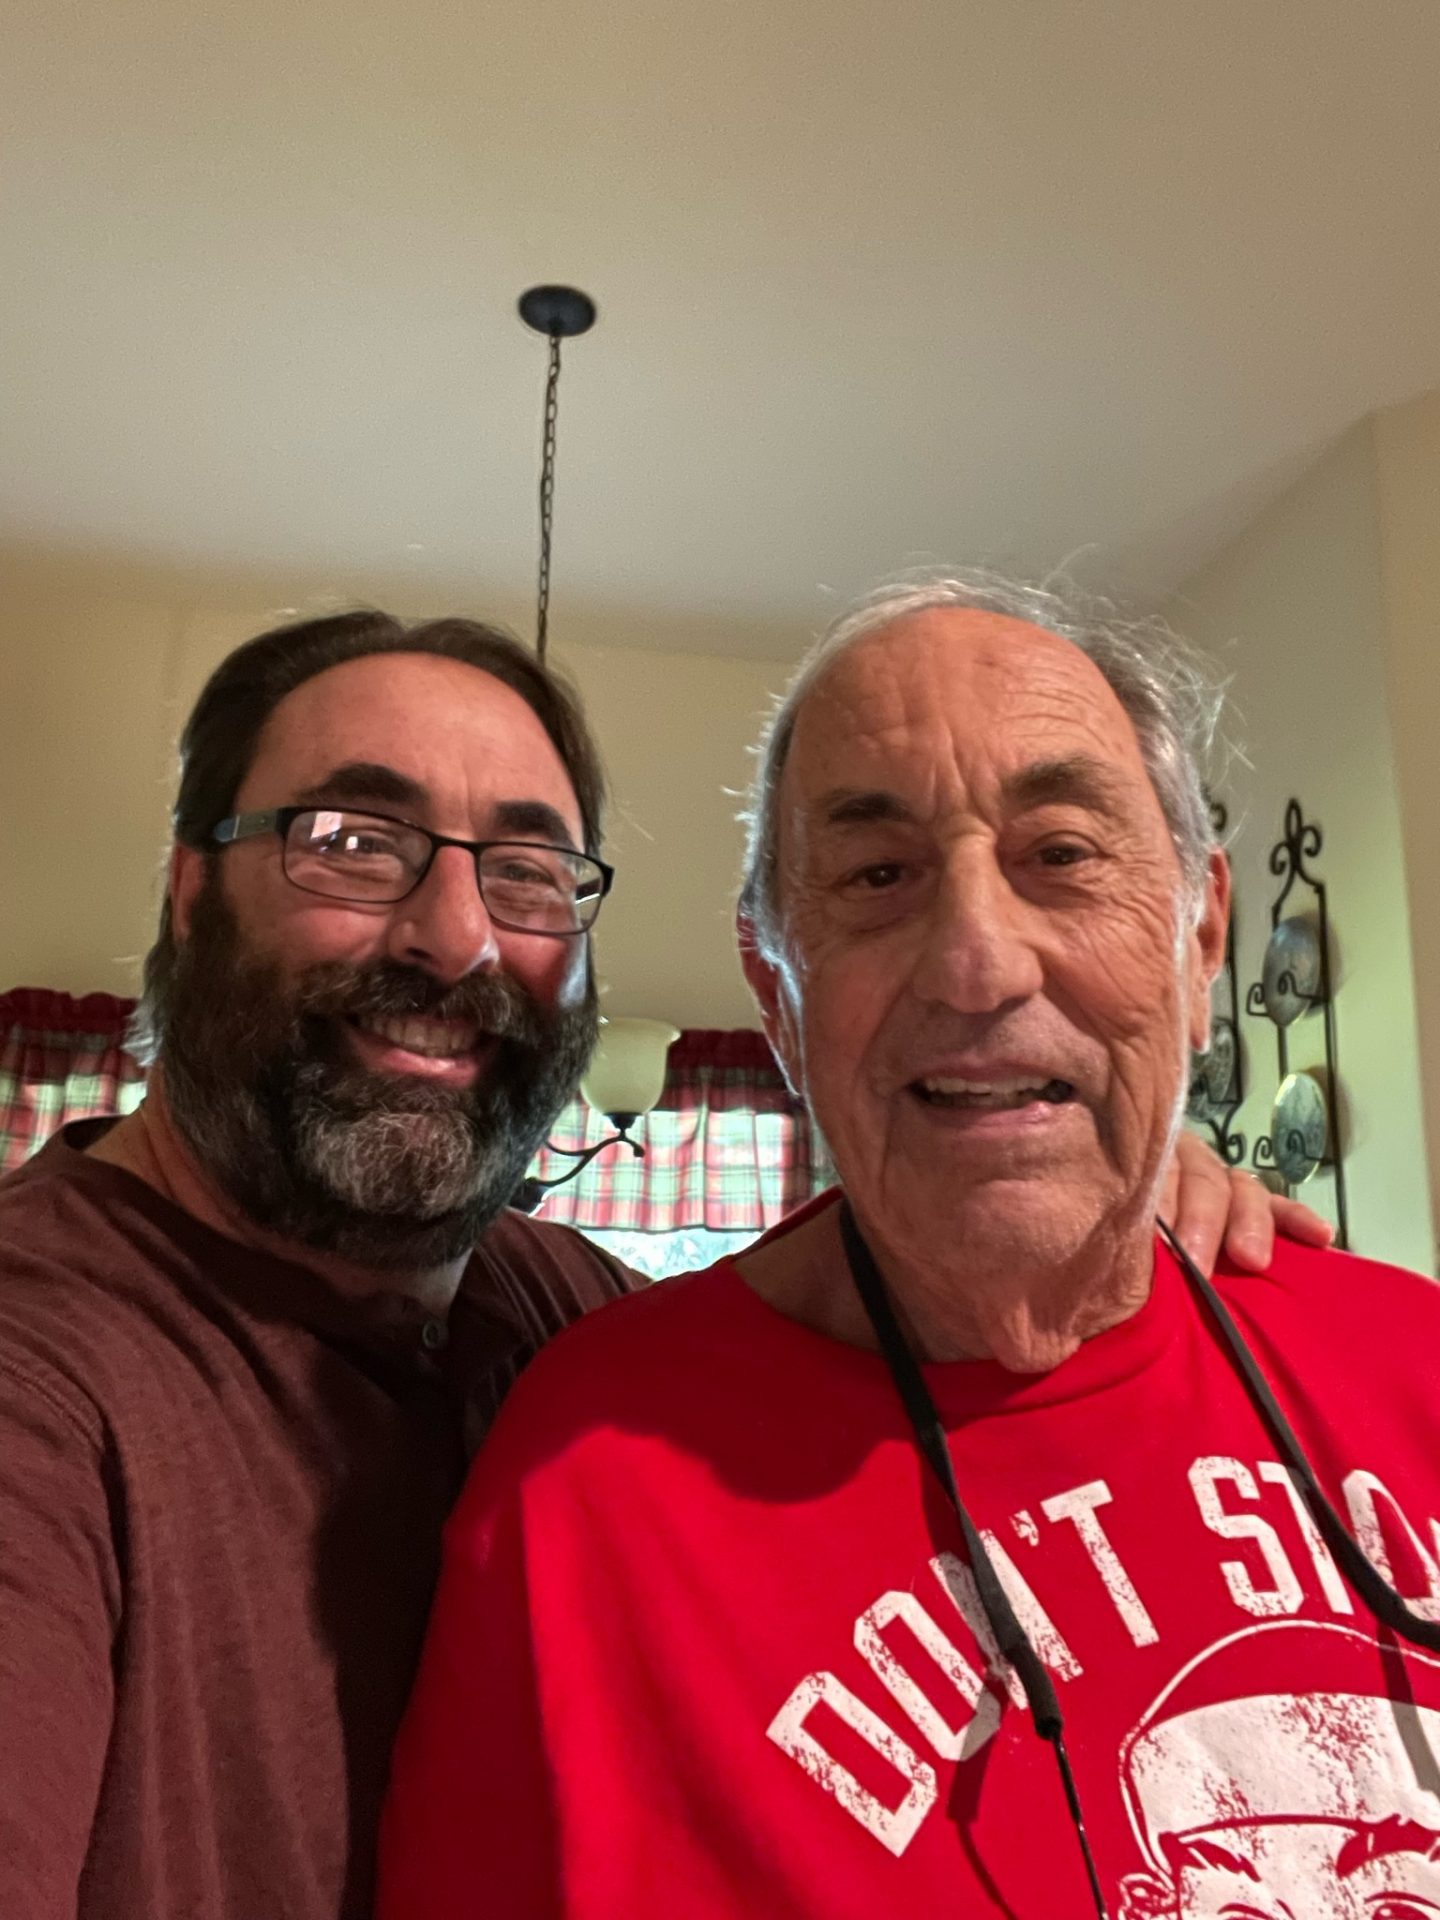 Great selfie with Dad Christmas Eve 2021